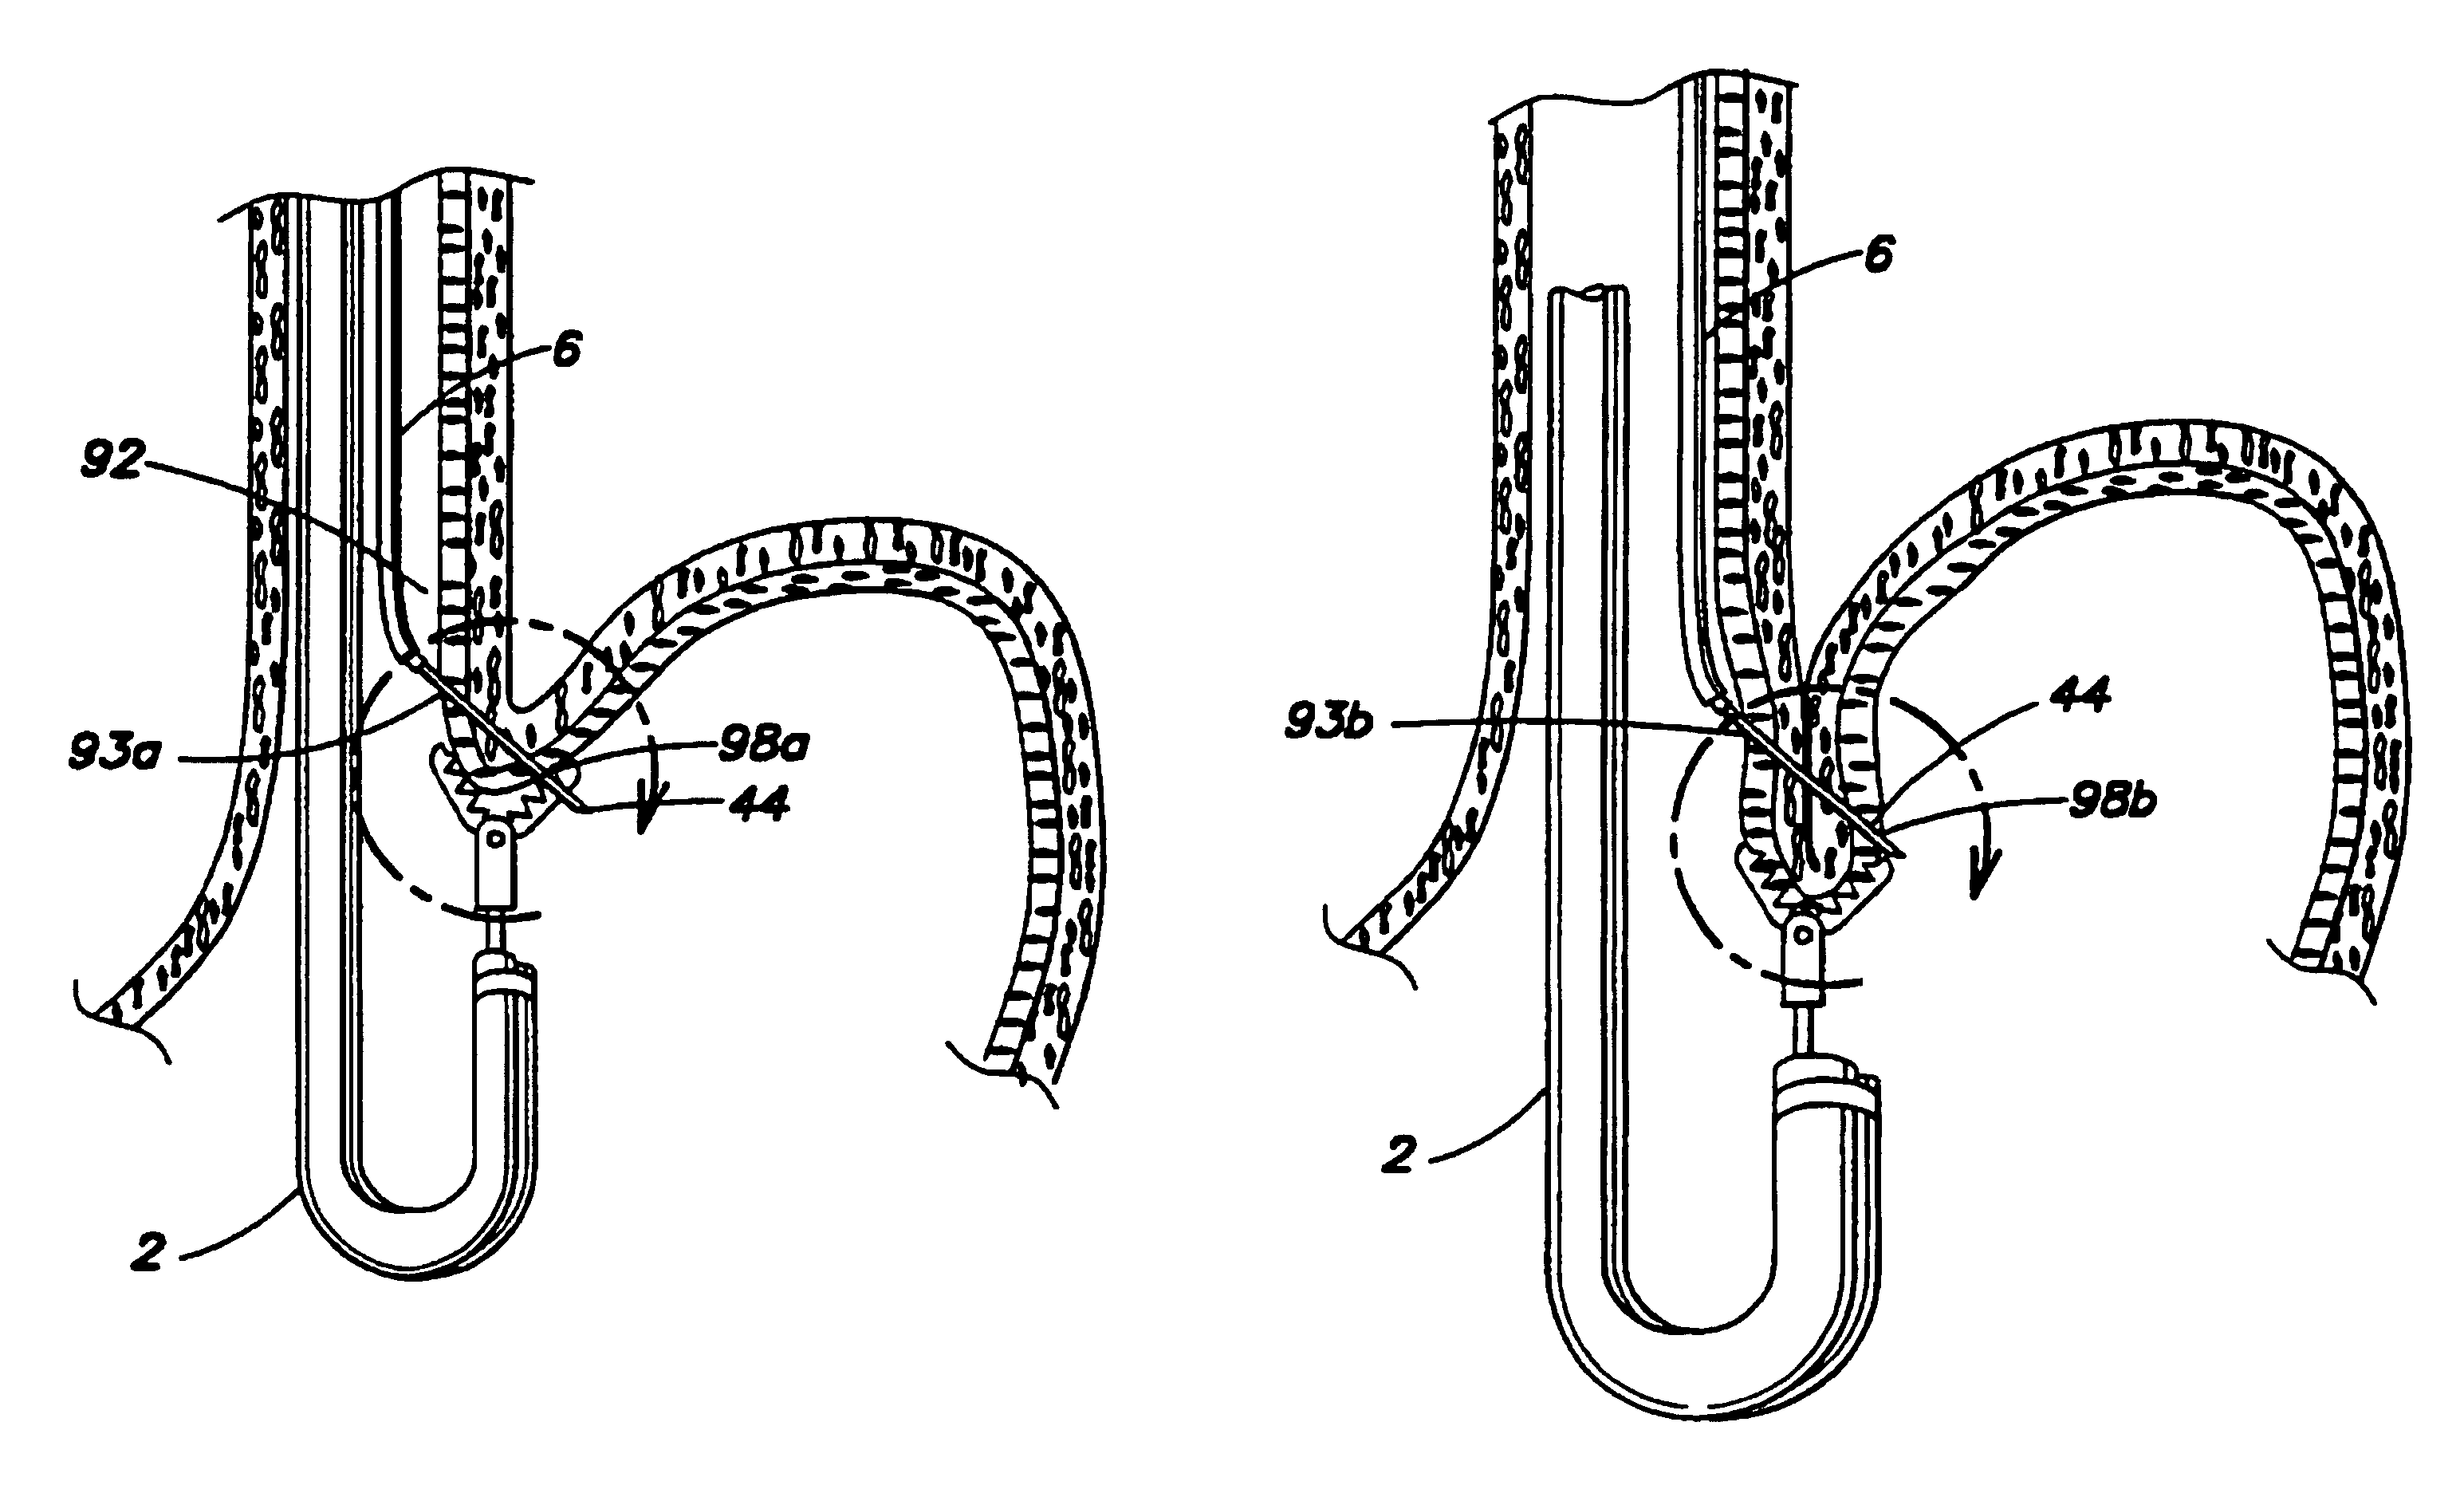 Endoscopic method for forming an artificial valve